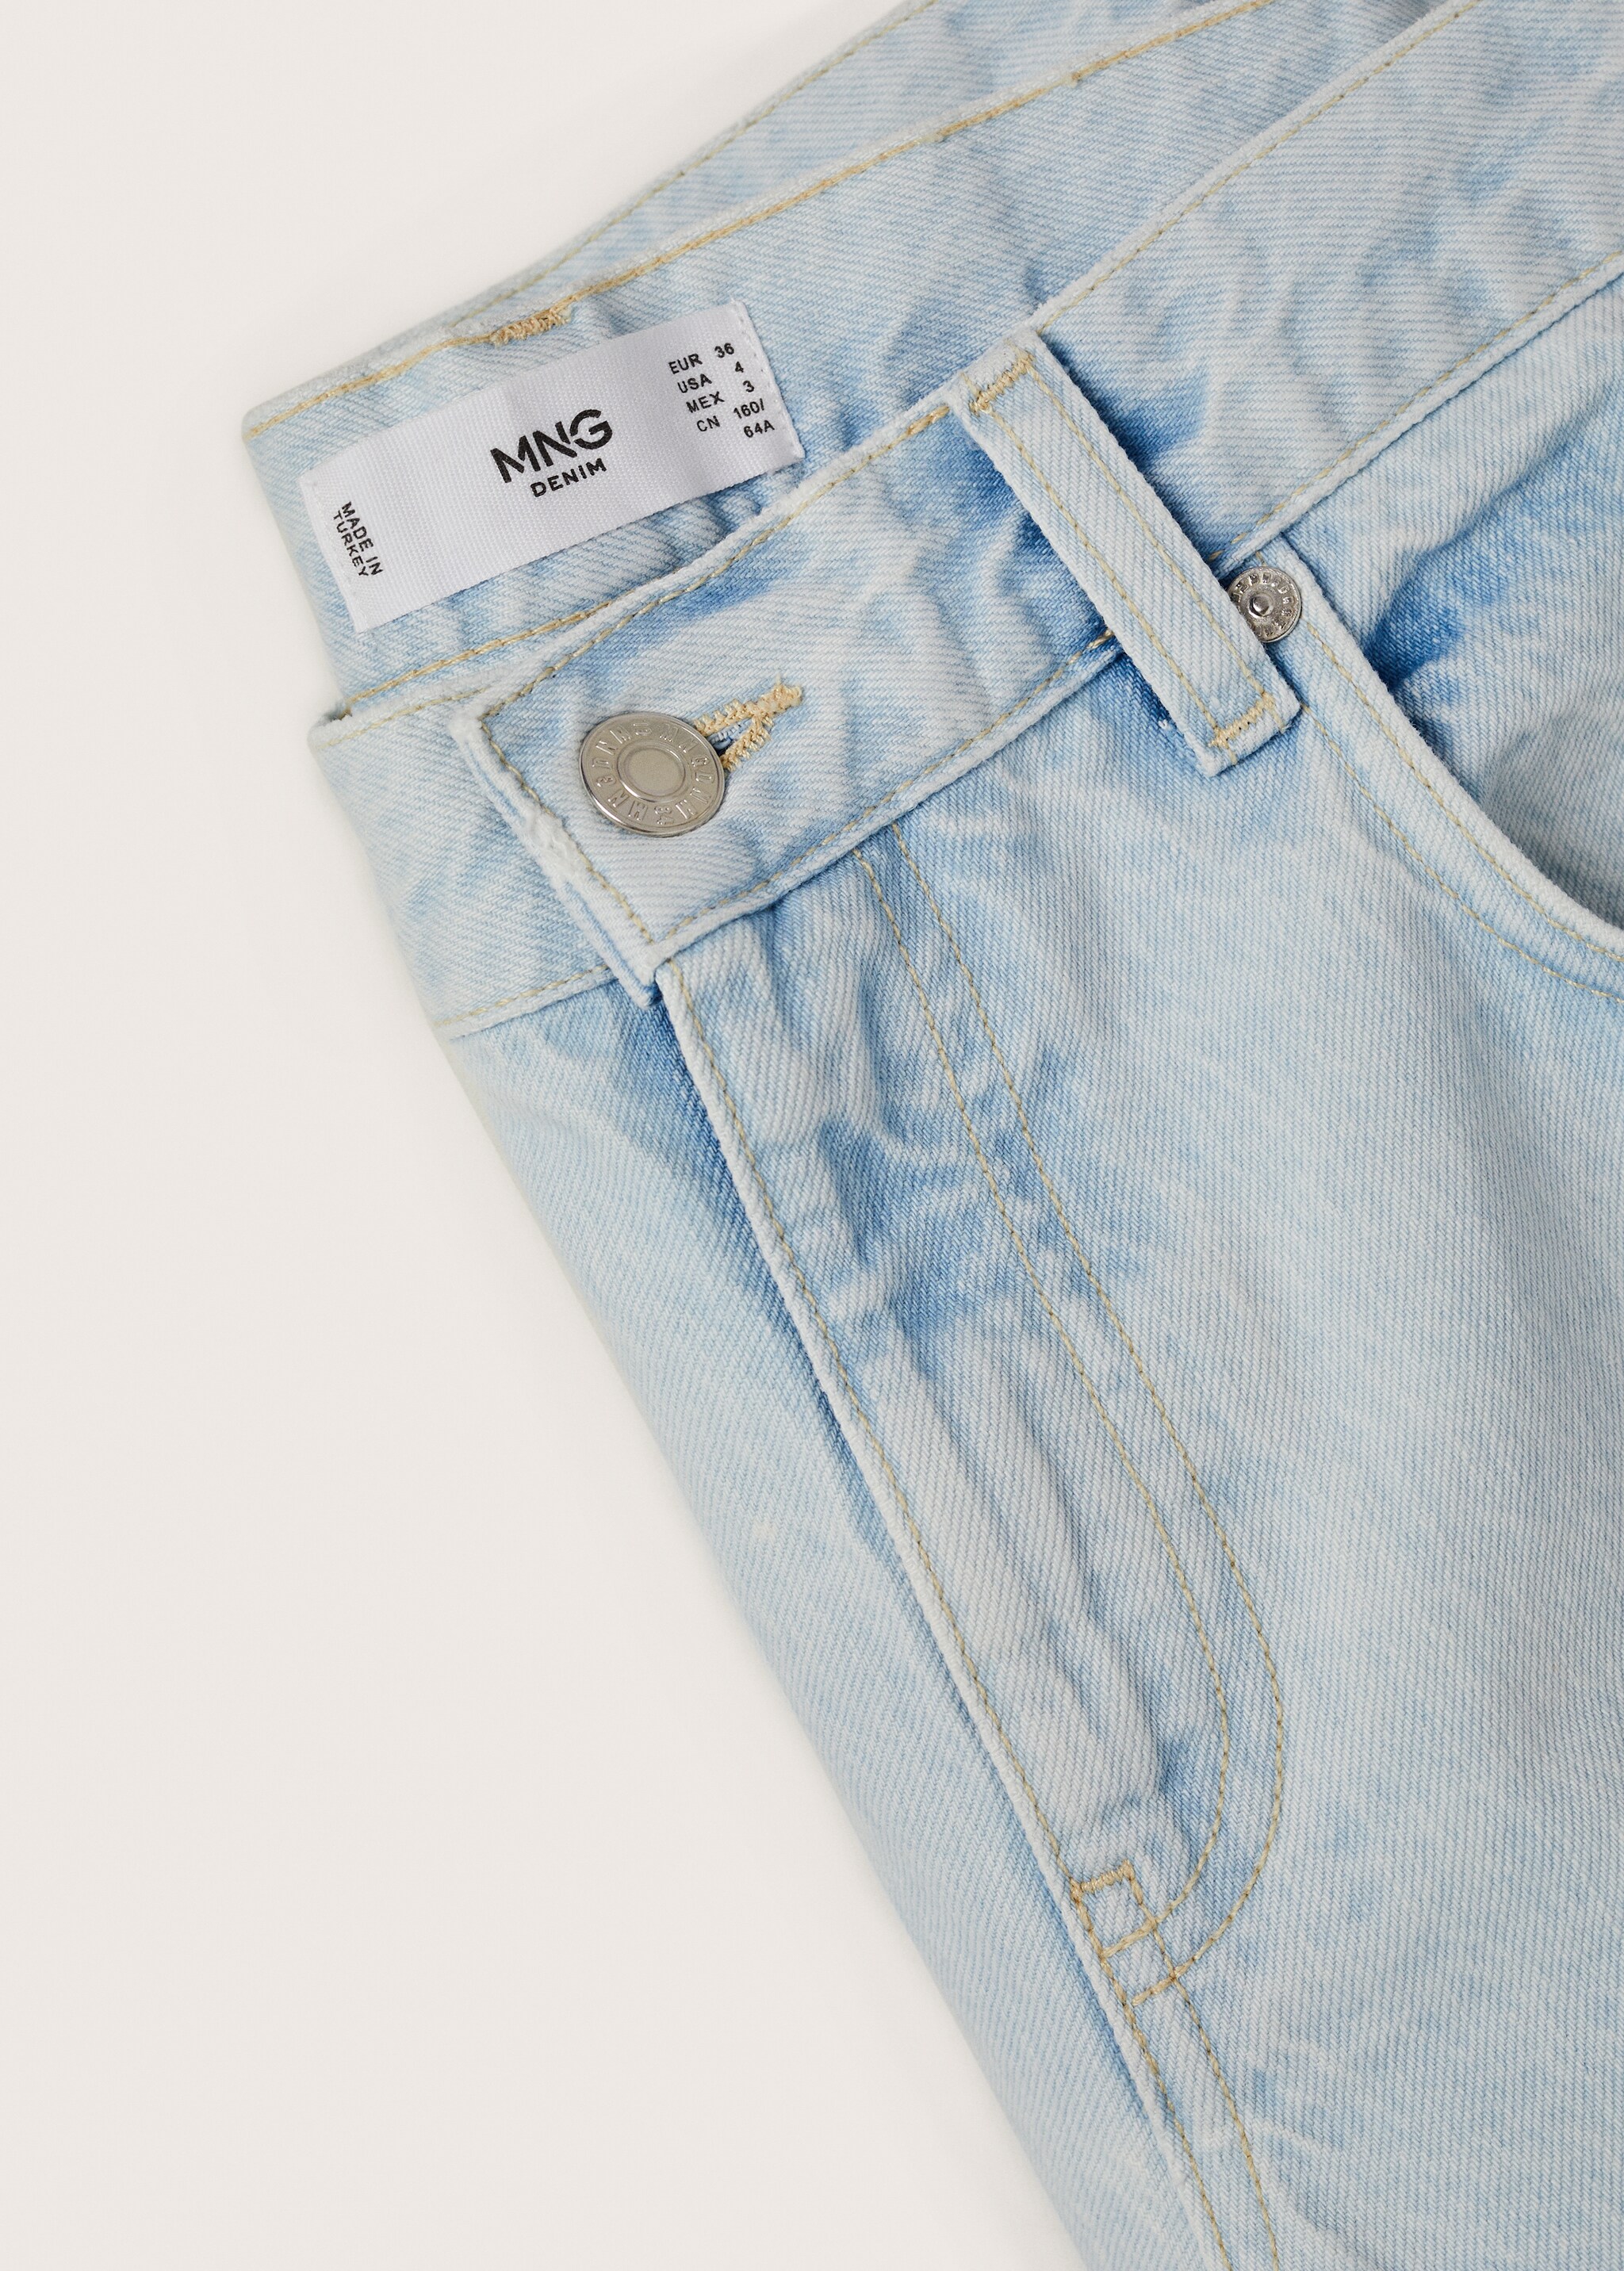 Low-rise wideleg jeans - Details of the article 8